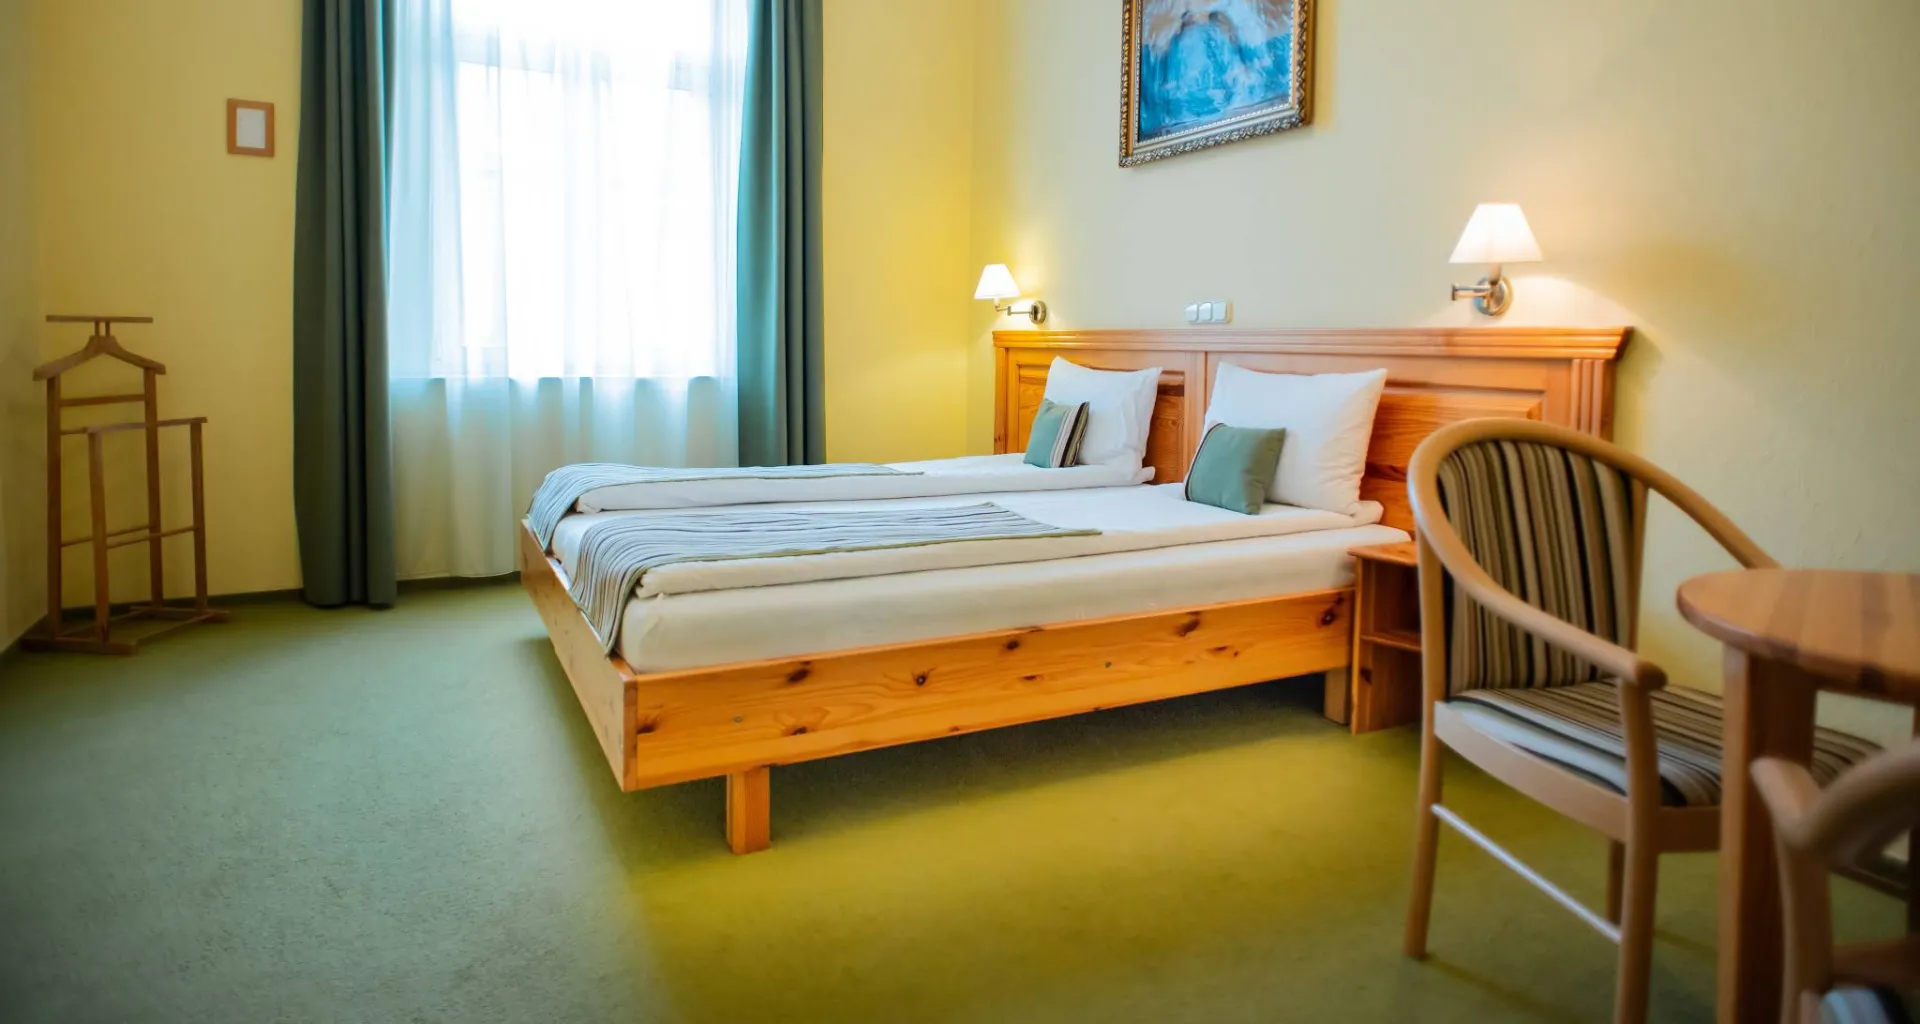 We welcome our guests with comfortable rooms